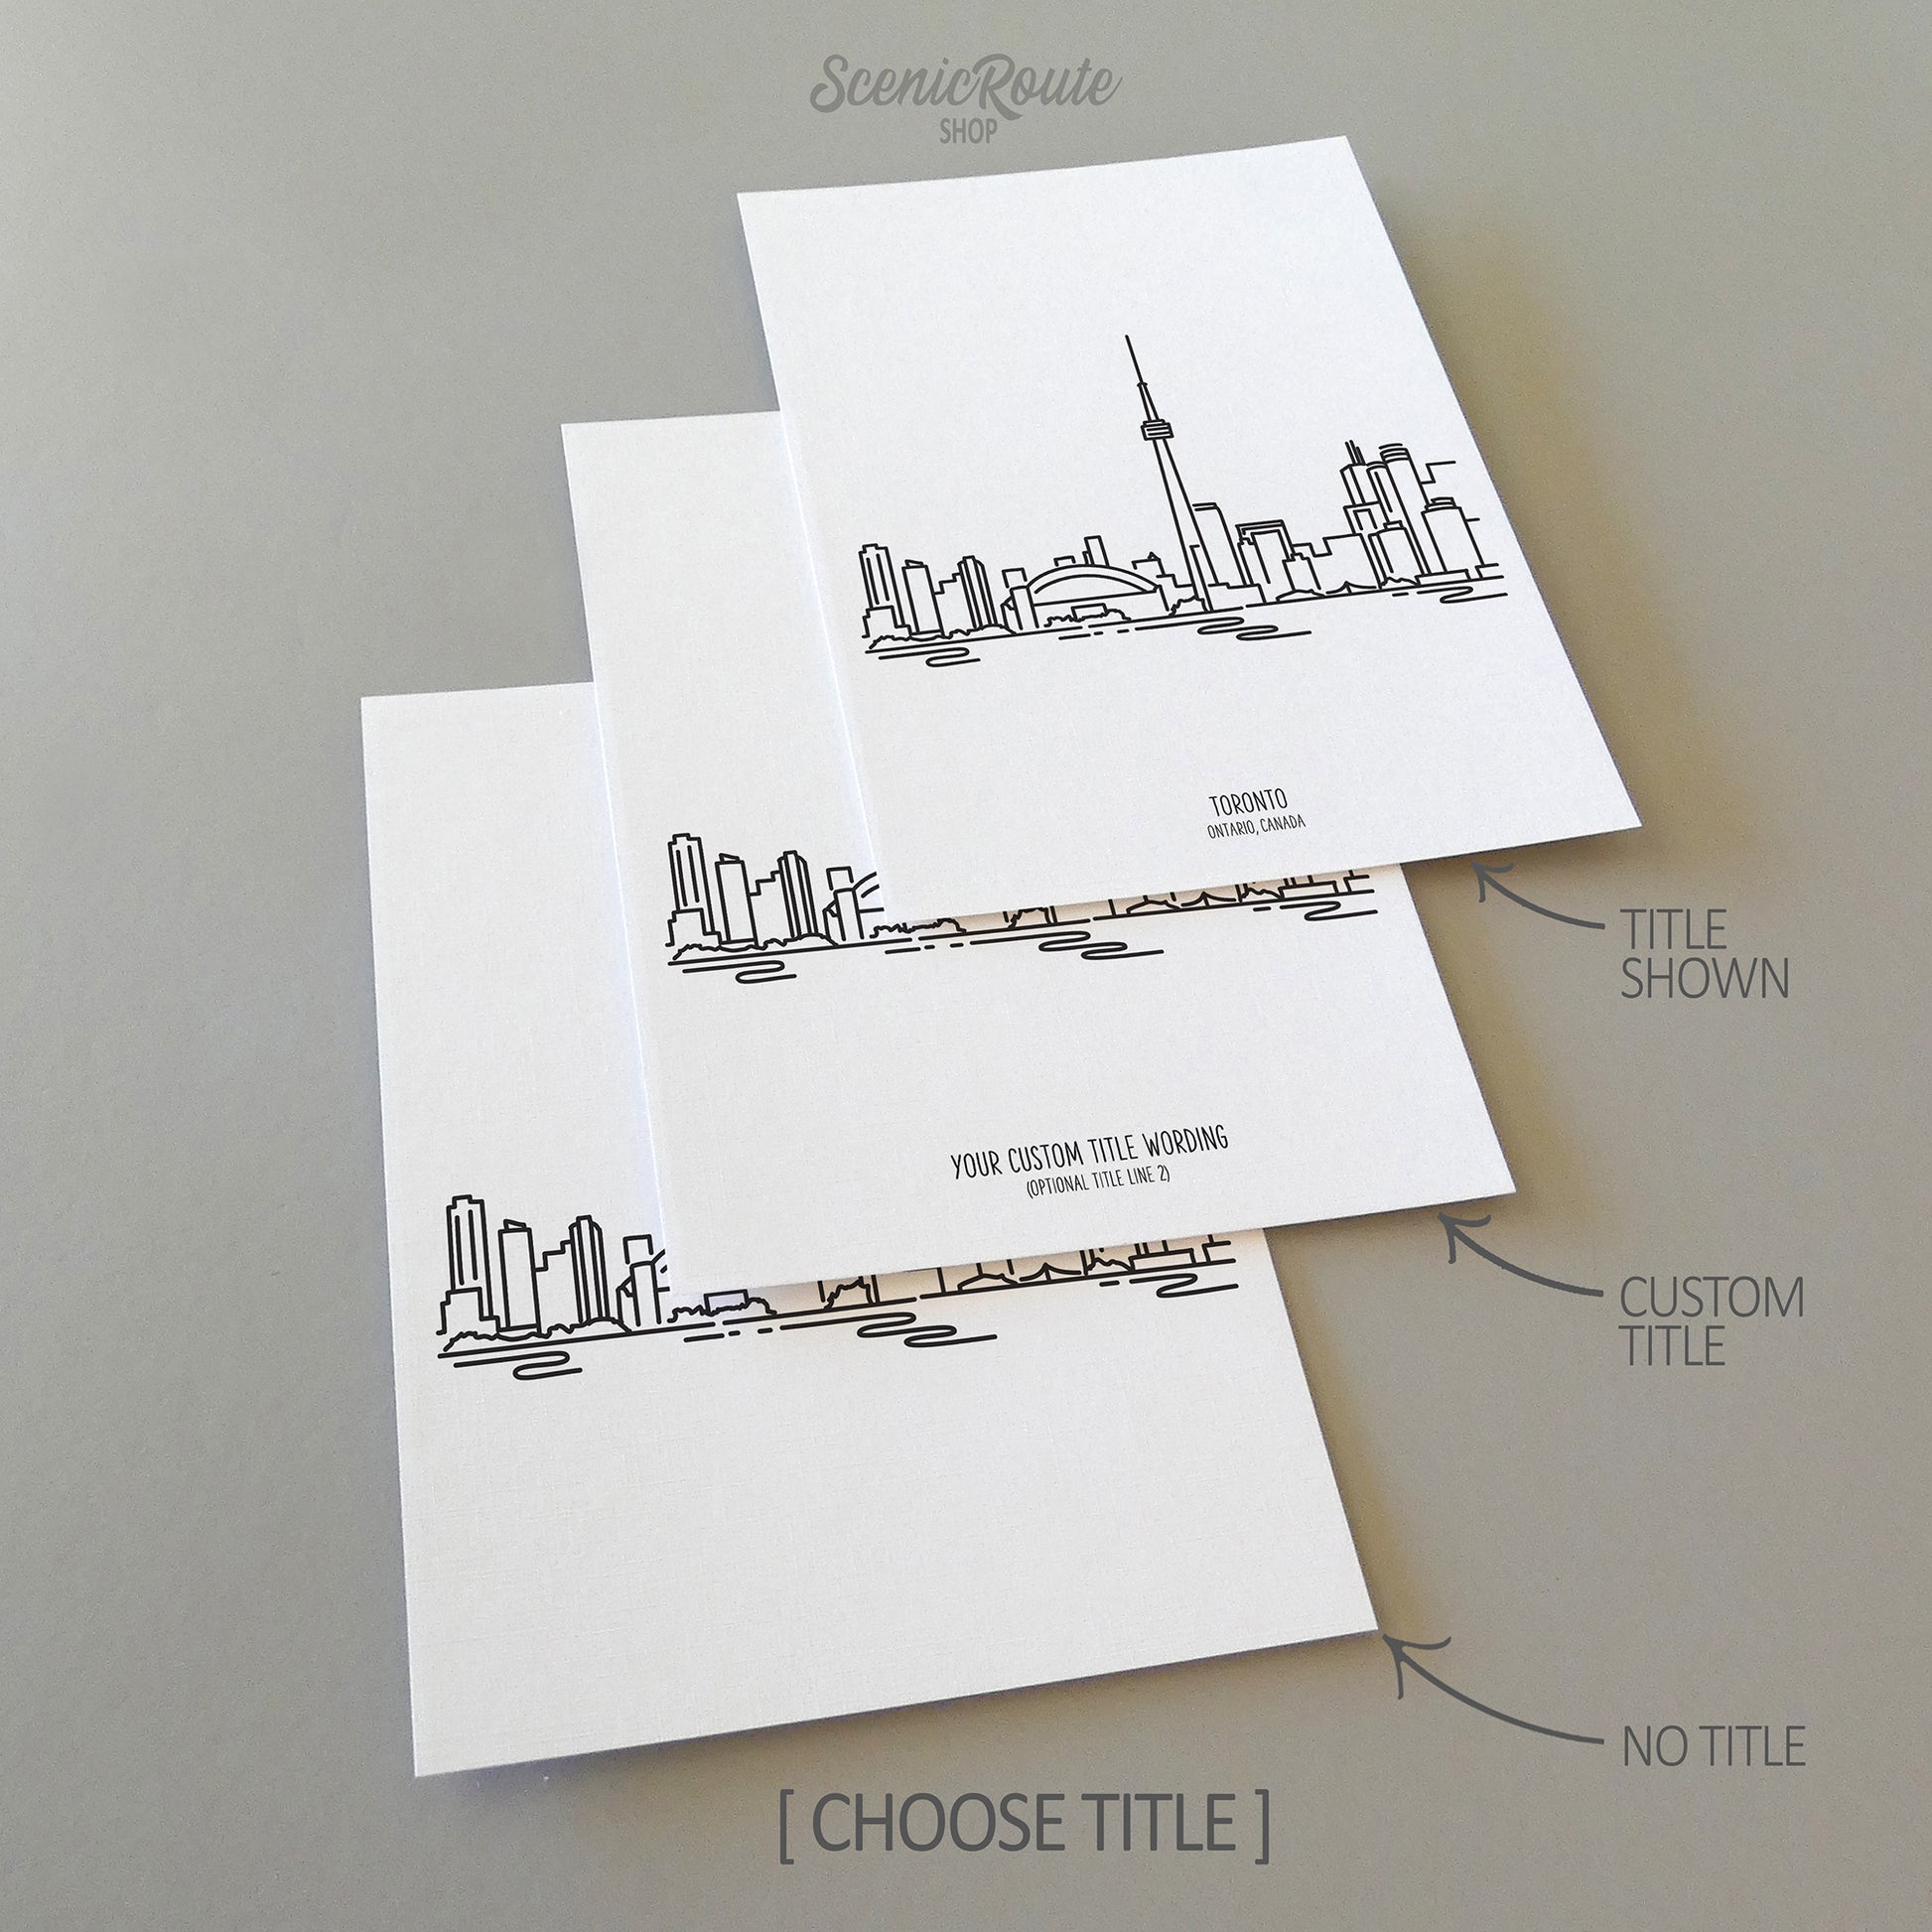 Three line art drawings of the Toronto Canada Skyline on white linen paper with a gray background. The pieces are shown with title options that can be chosen and personalized.